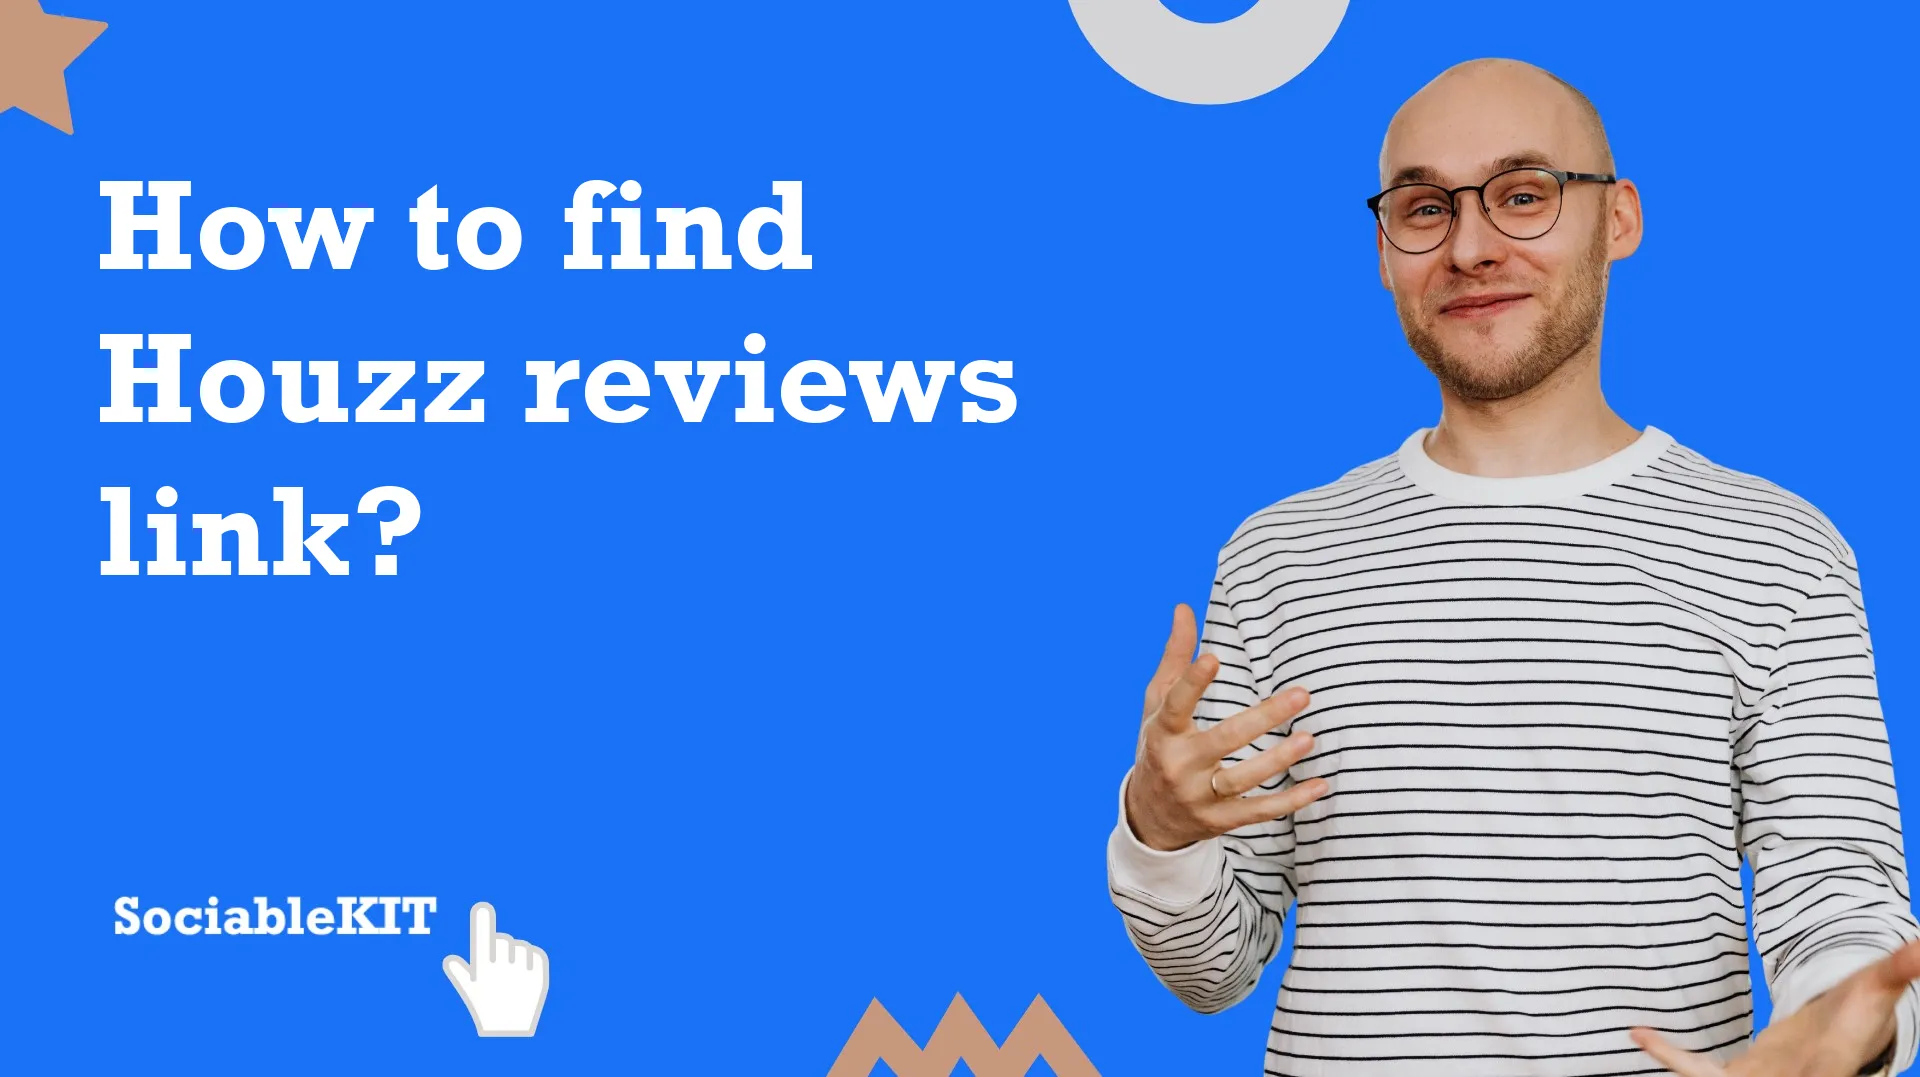 How to find Houzz reviews link?